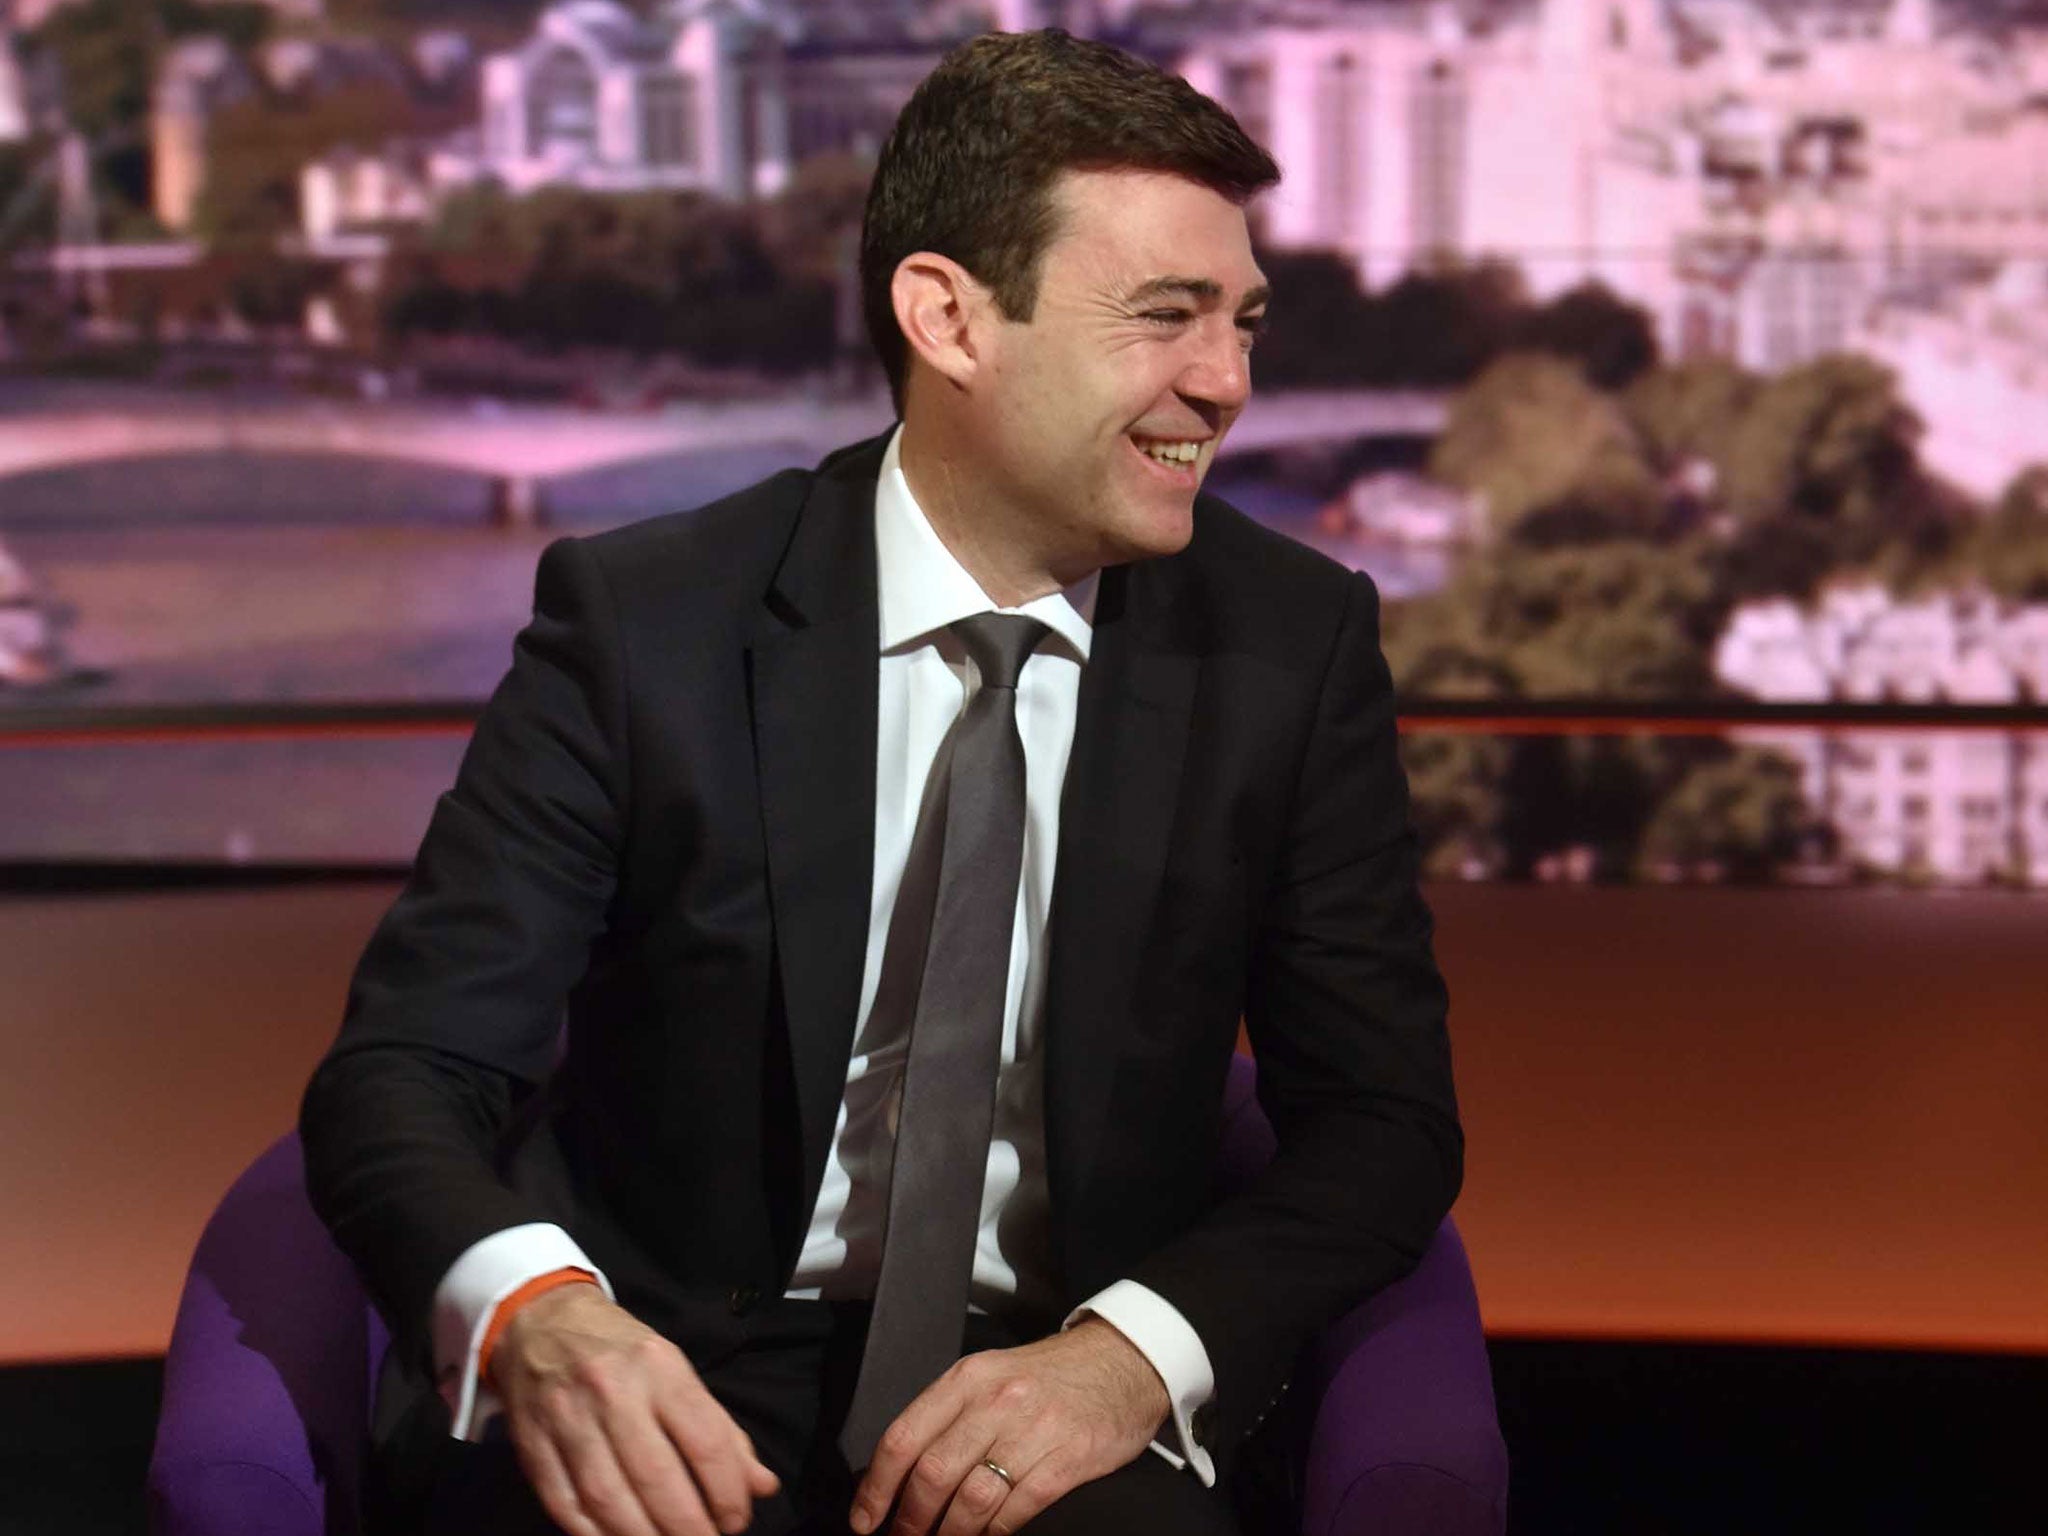 Andy Burnham described himself as ‘the unifying candidate’ on ‘The Andrew Marr Show’